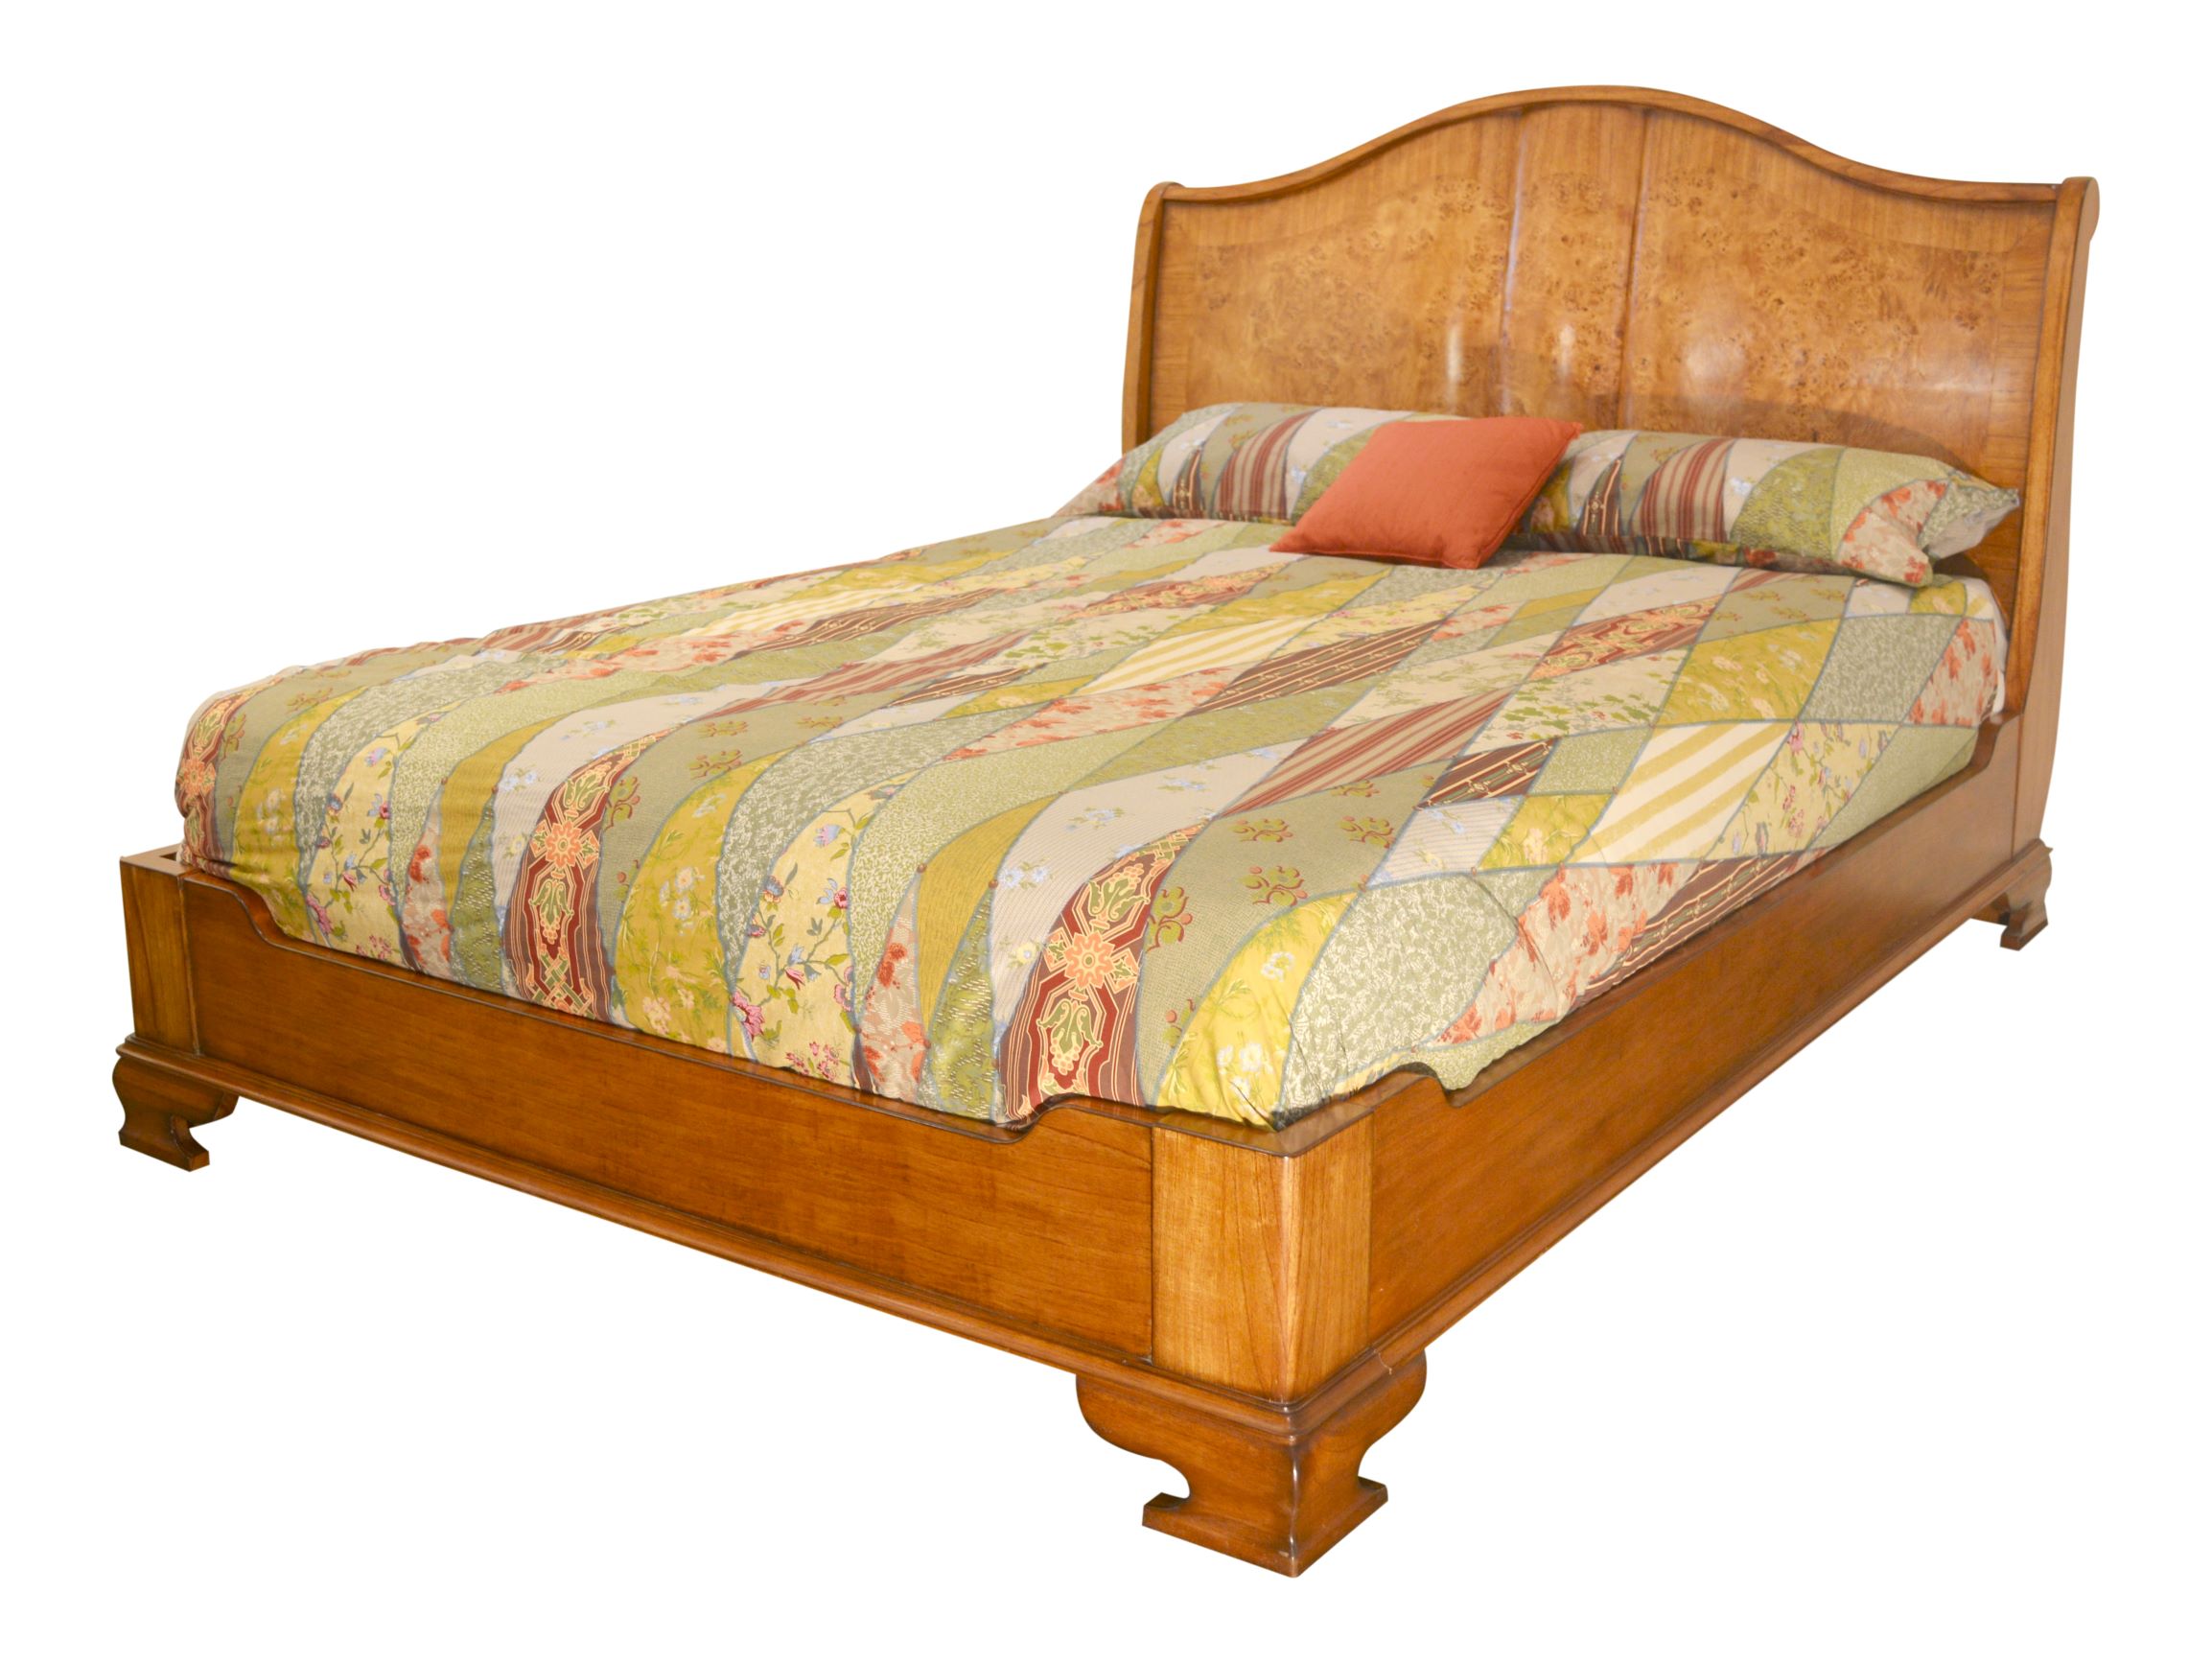 Hampton Walnut Sleigh Bed With Low, King Sleigh Bed Headboard And Footboard